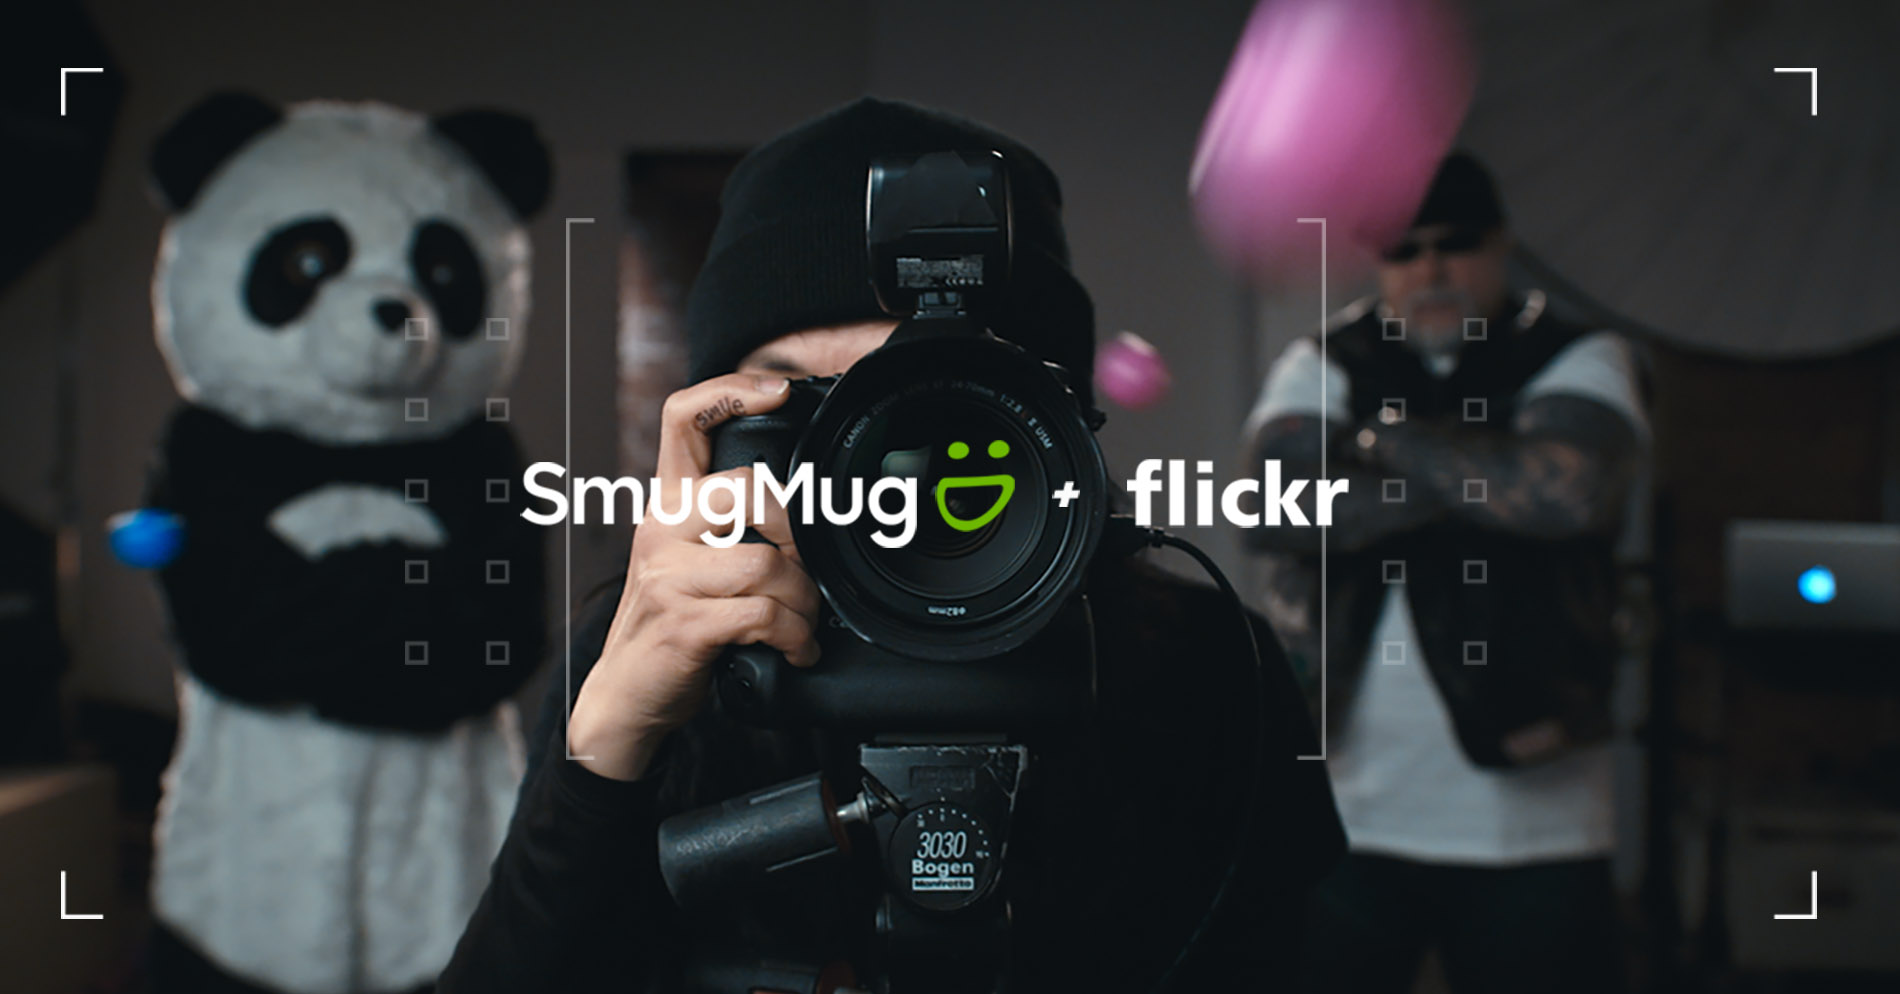 Flickr joins SmugMug to create the world’s best home for photography